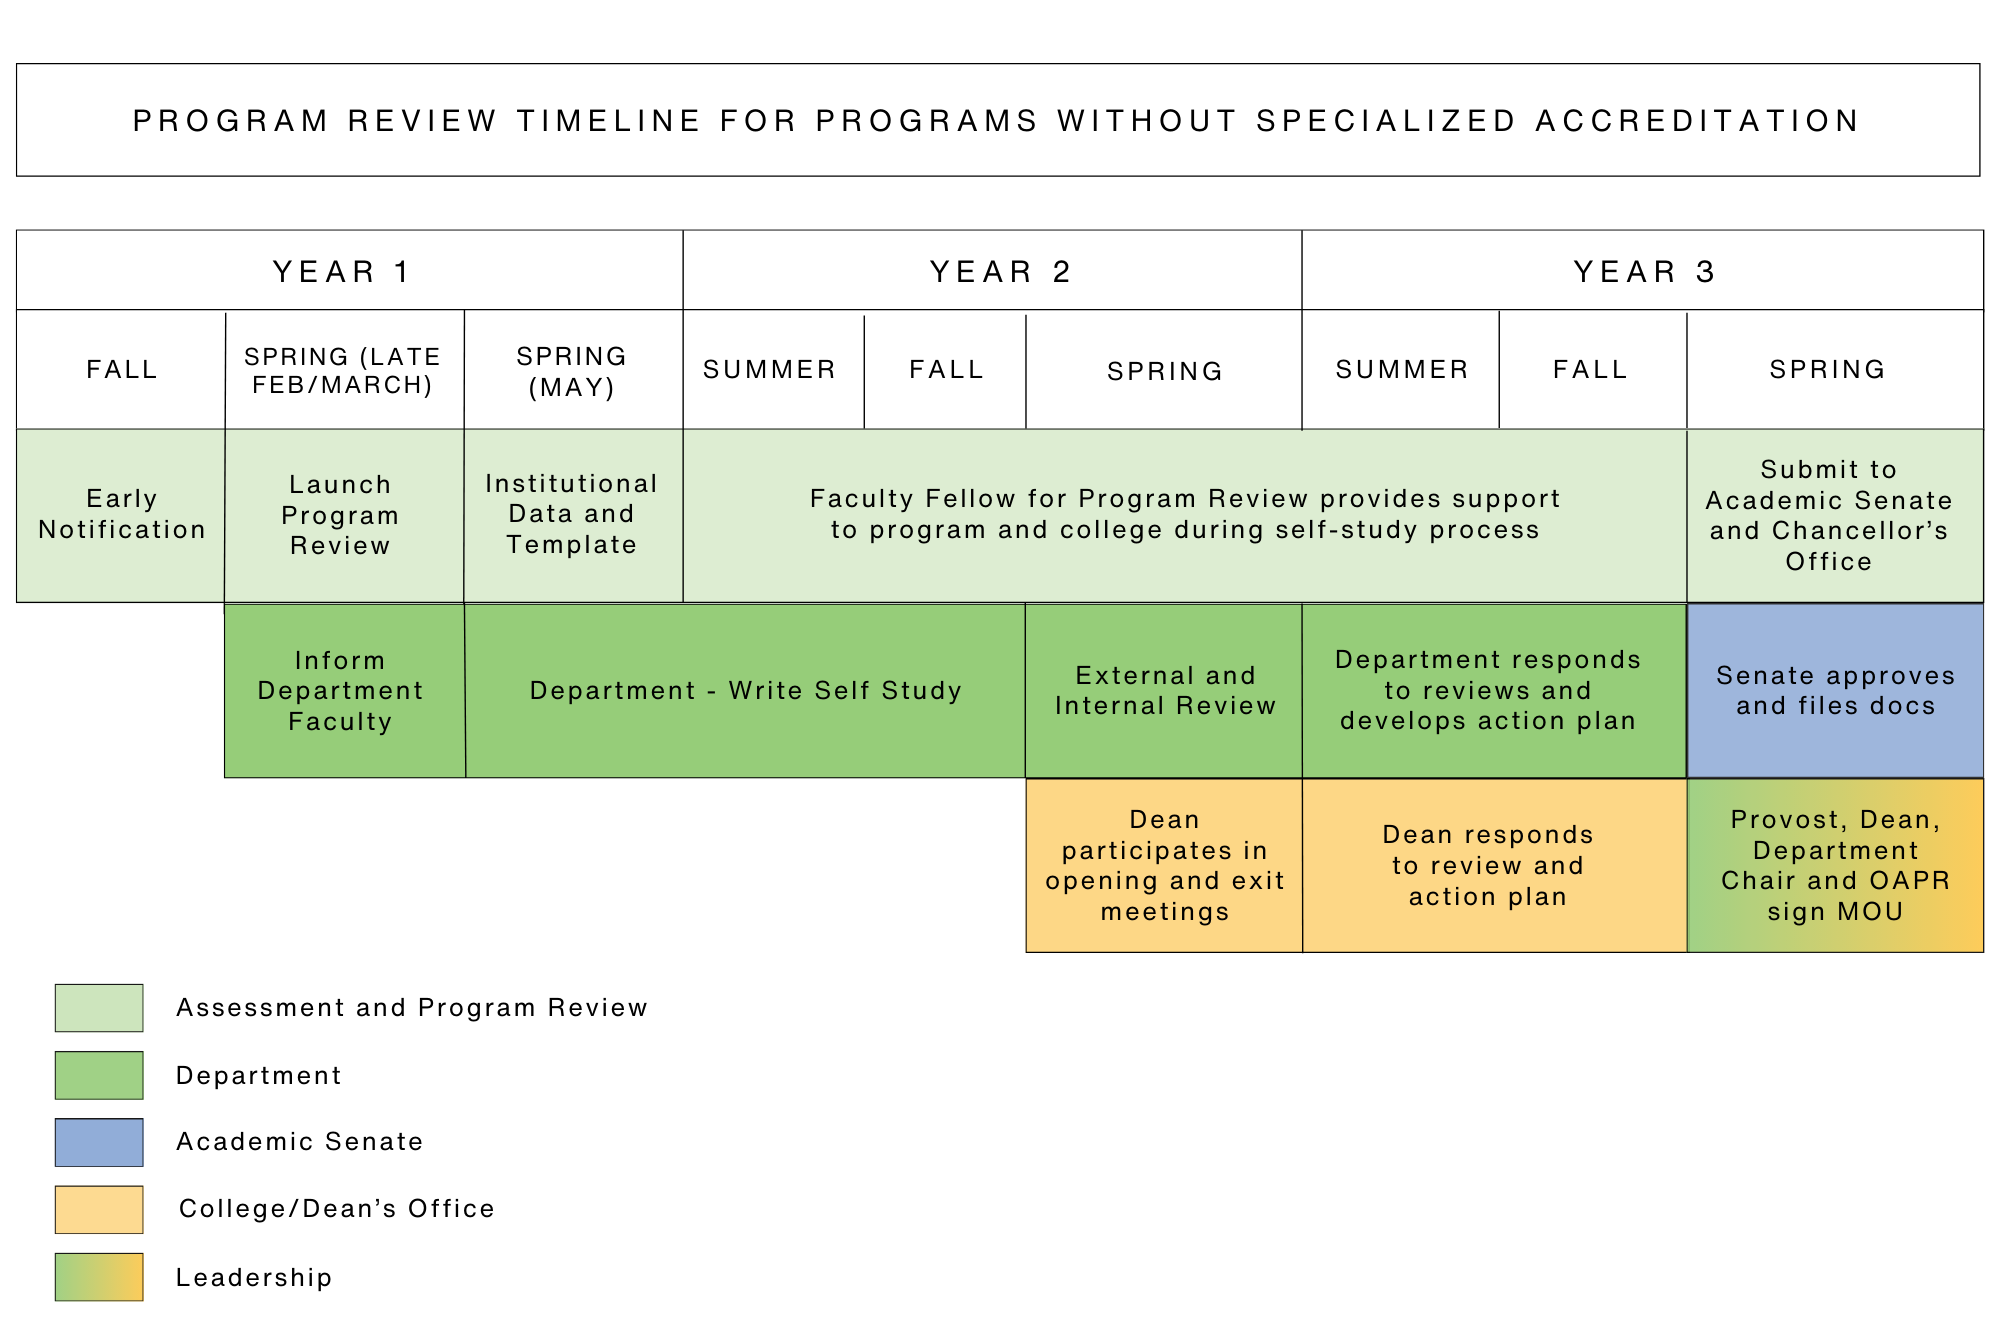 Program Review Timeline for programs without specialized accreditation